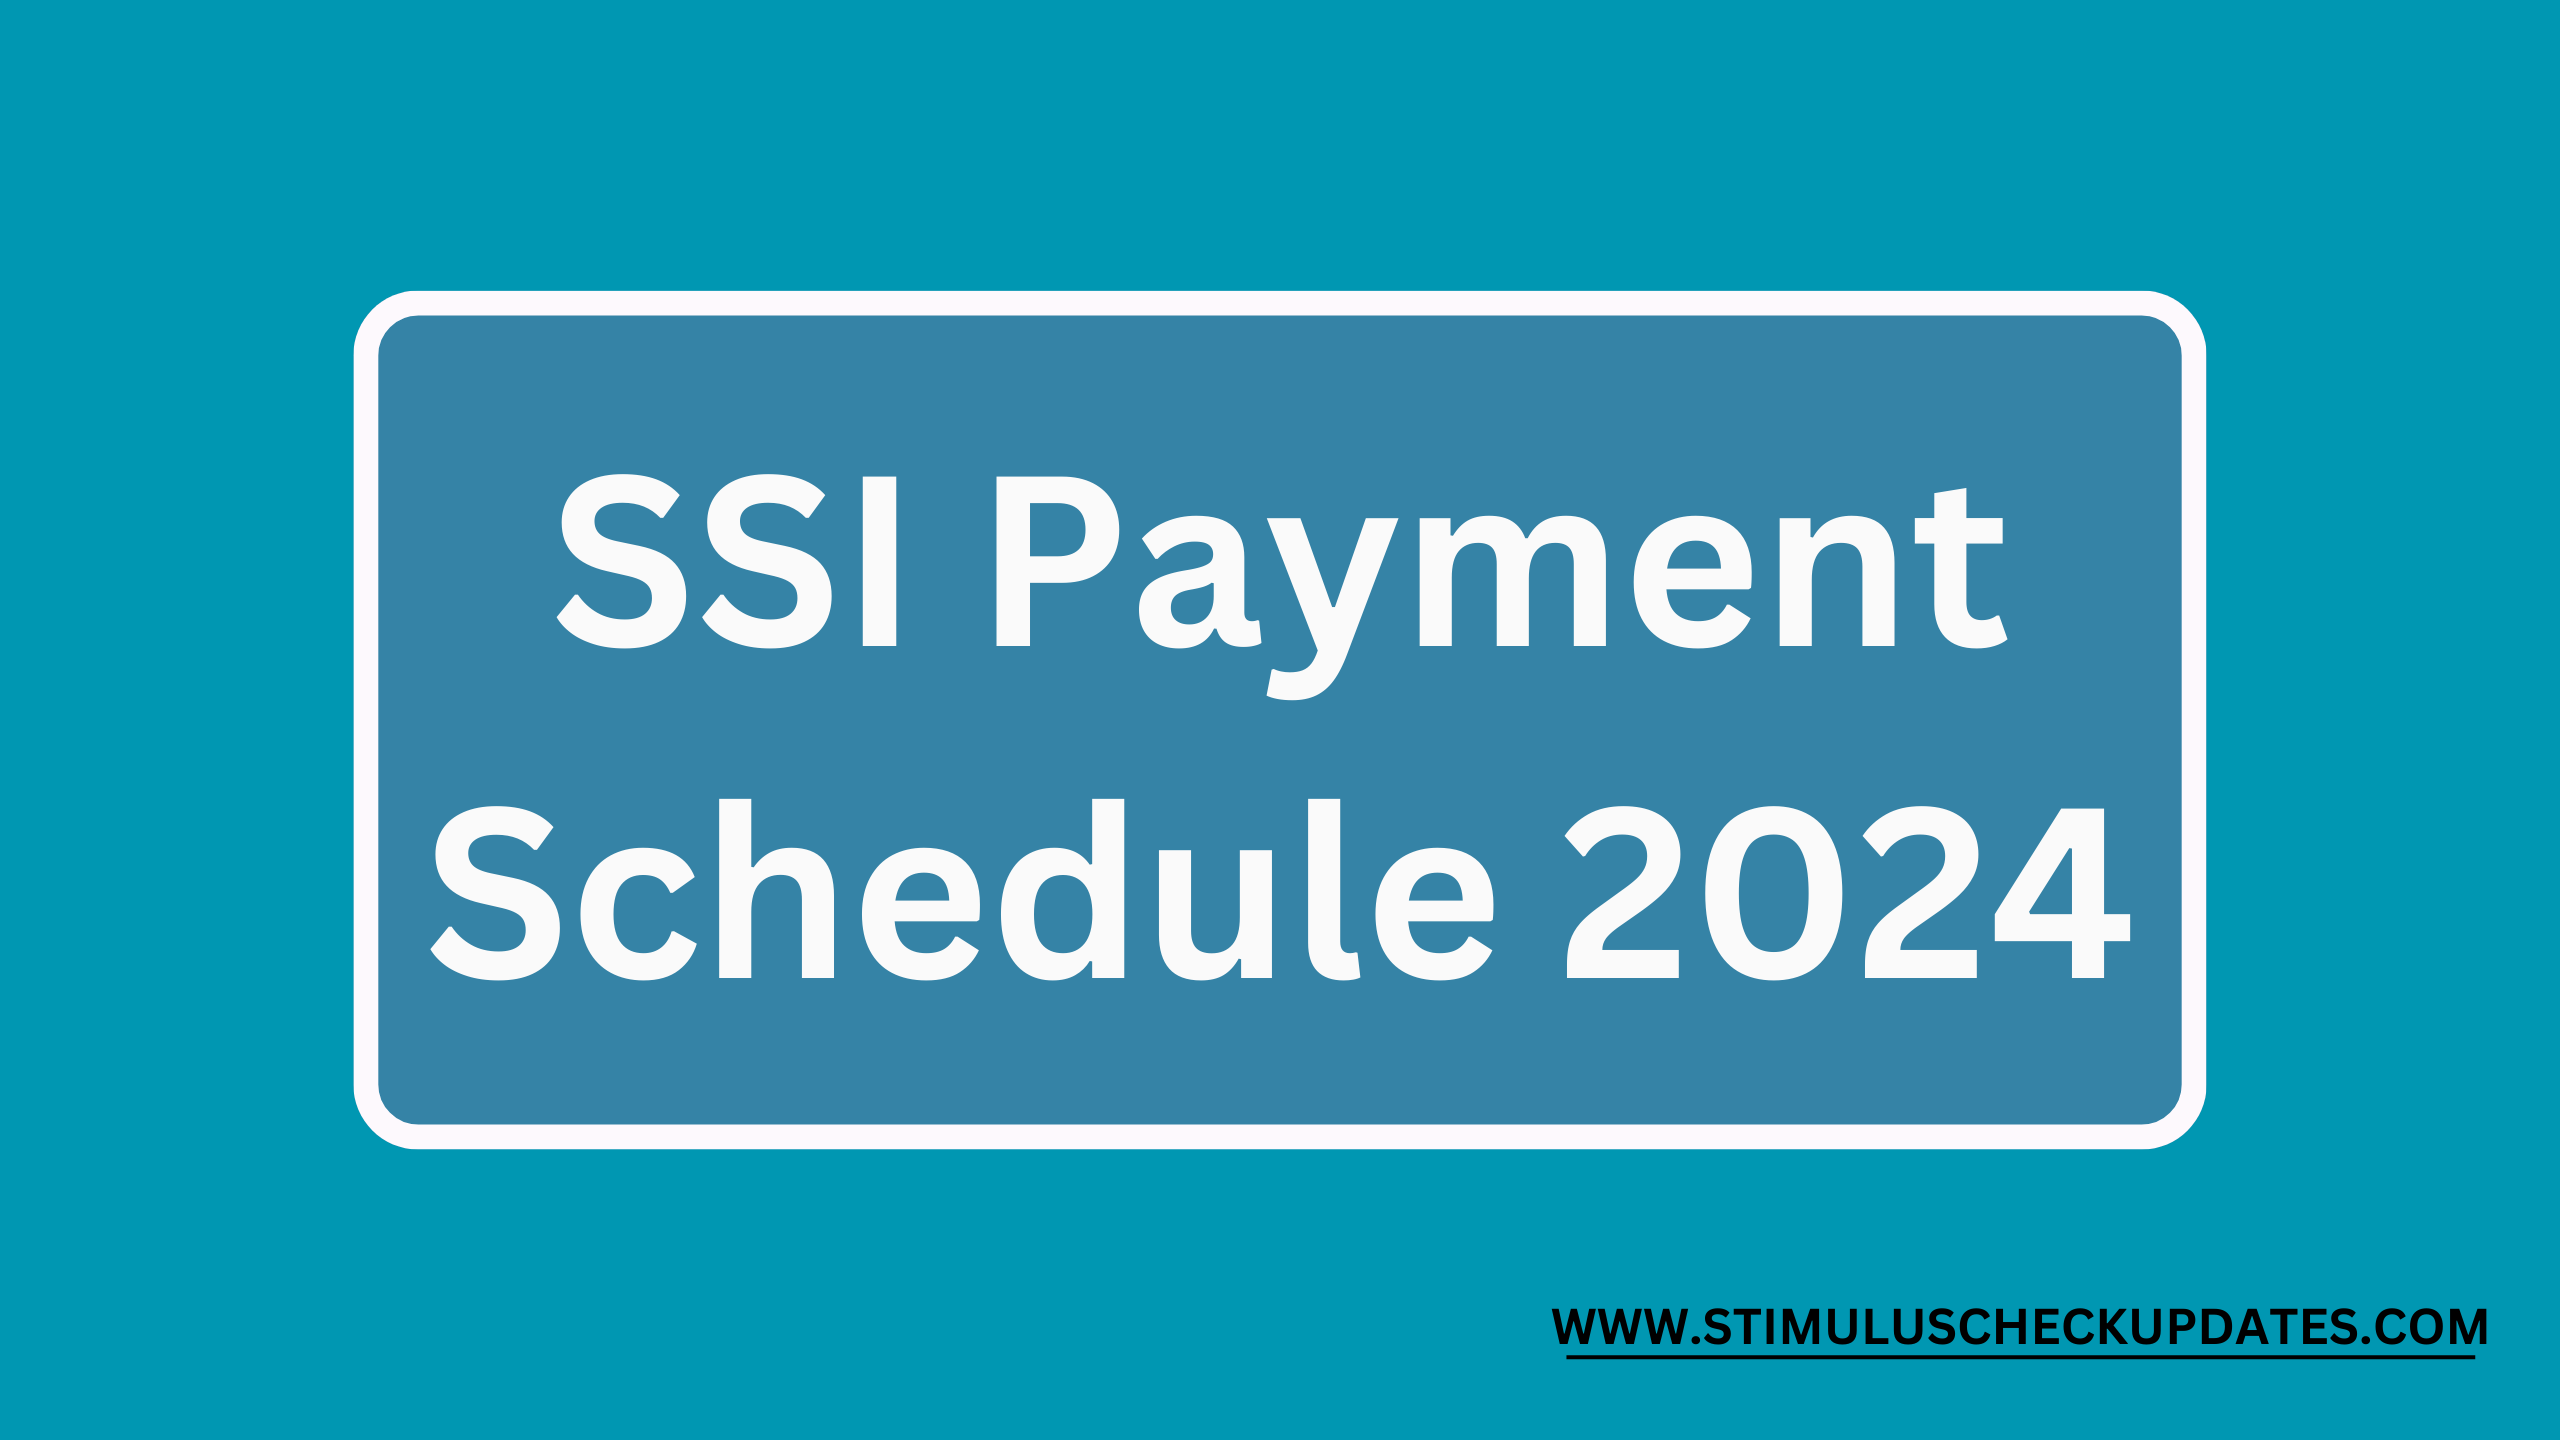 SSI Payment Schedule January 2024 And SSI Payment Amount